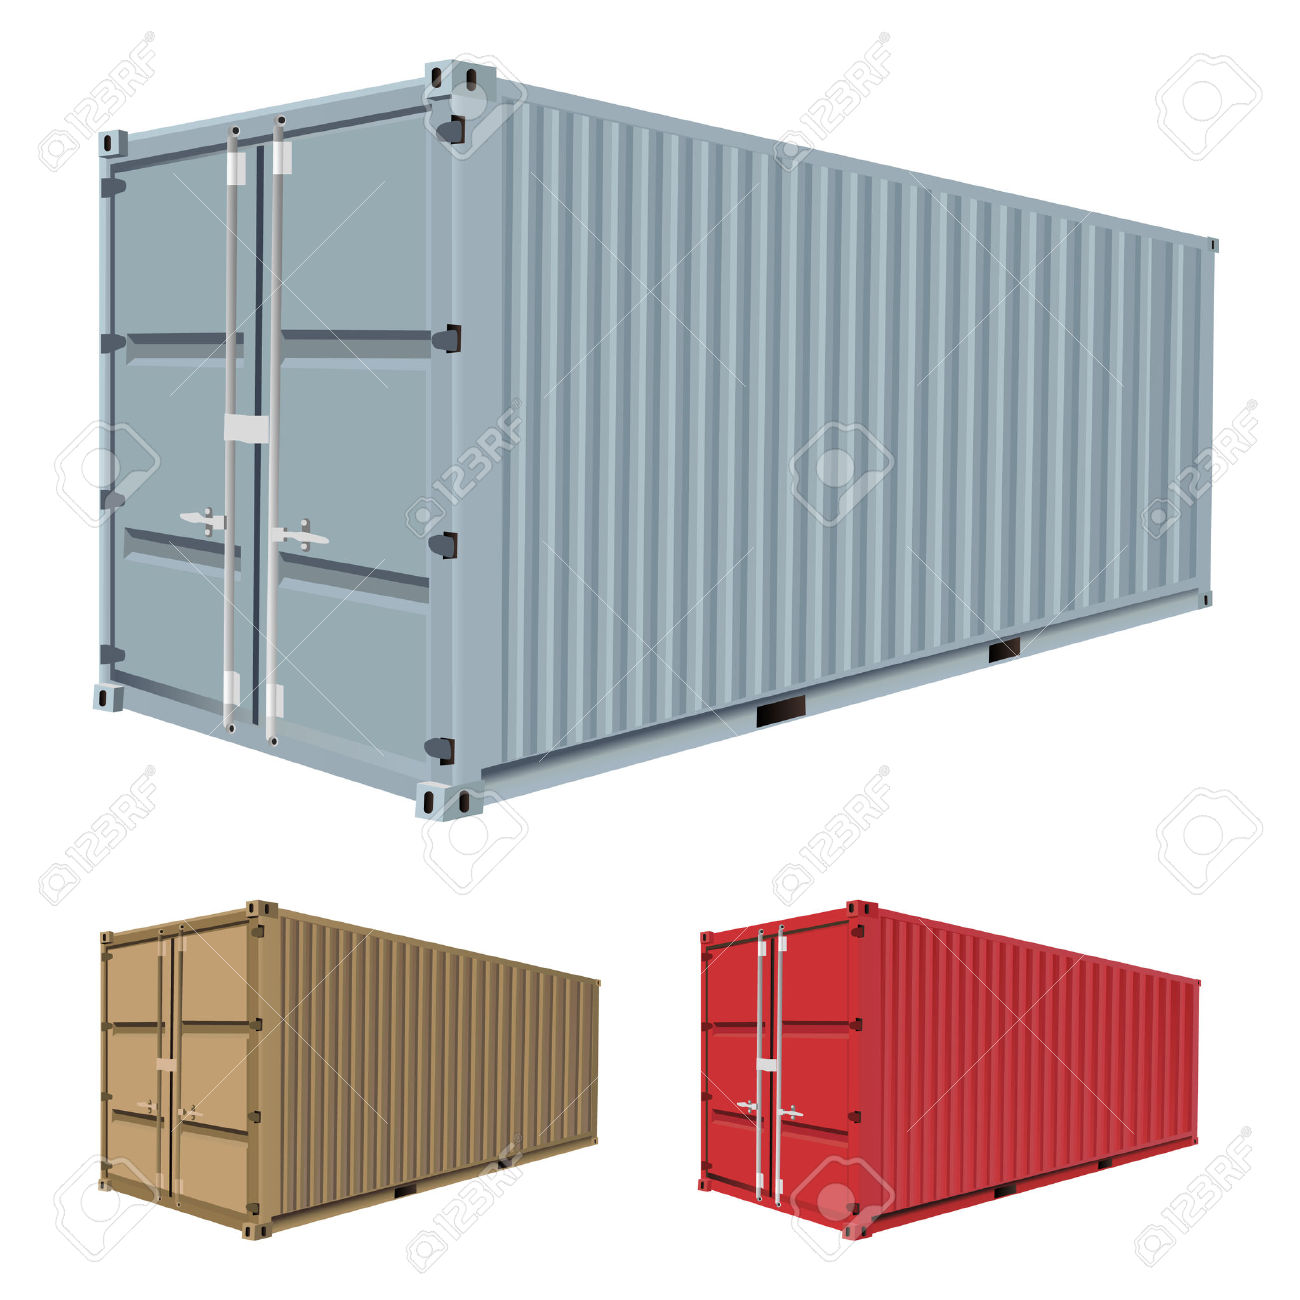 shipping container clipart - photo #31